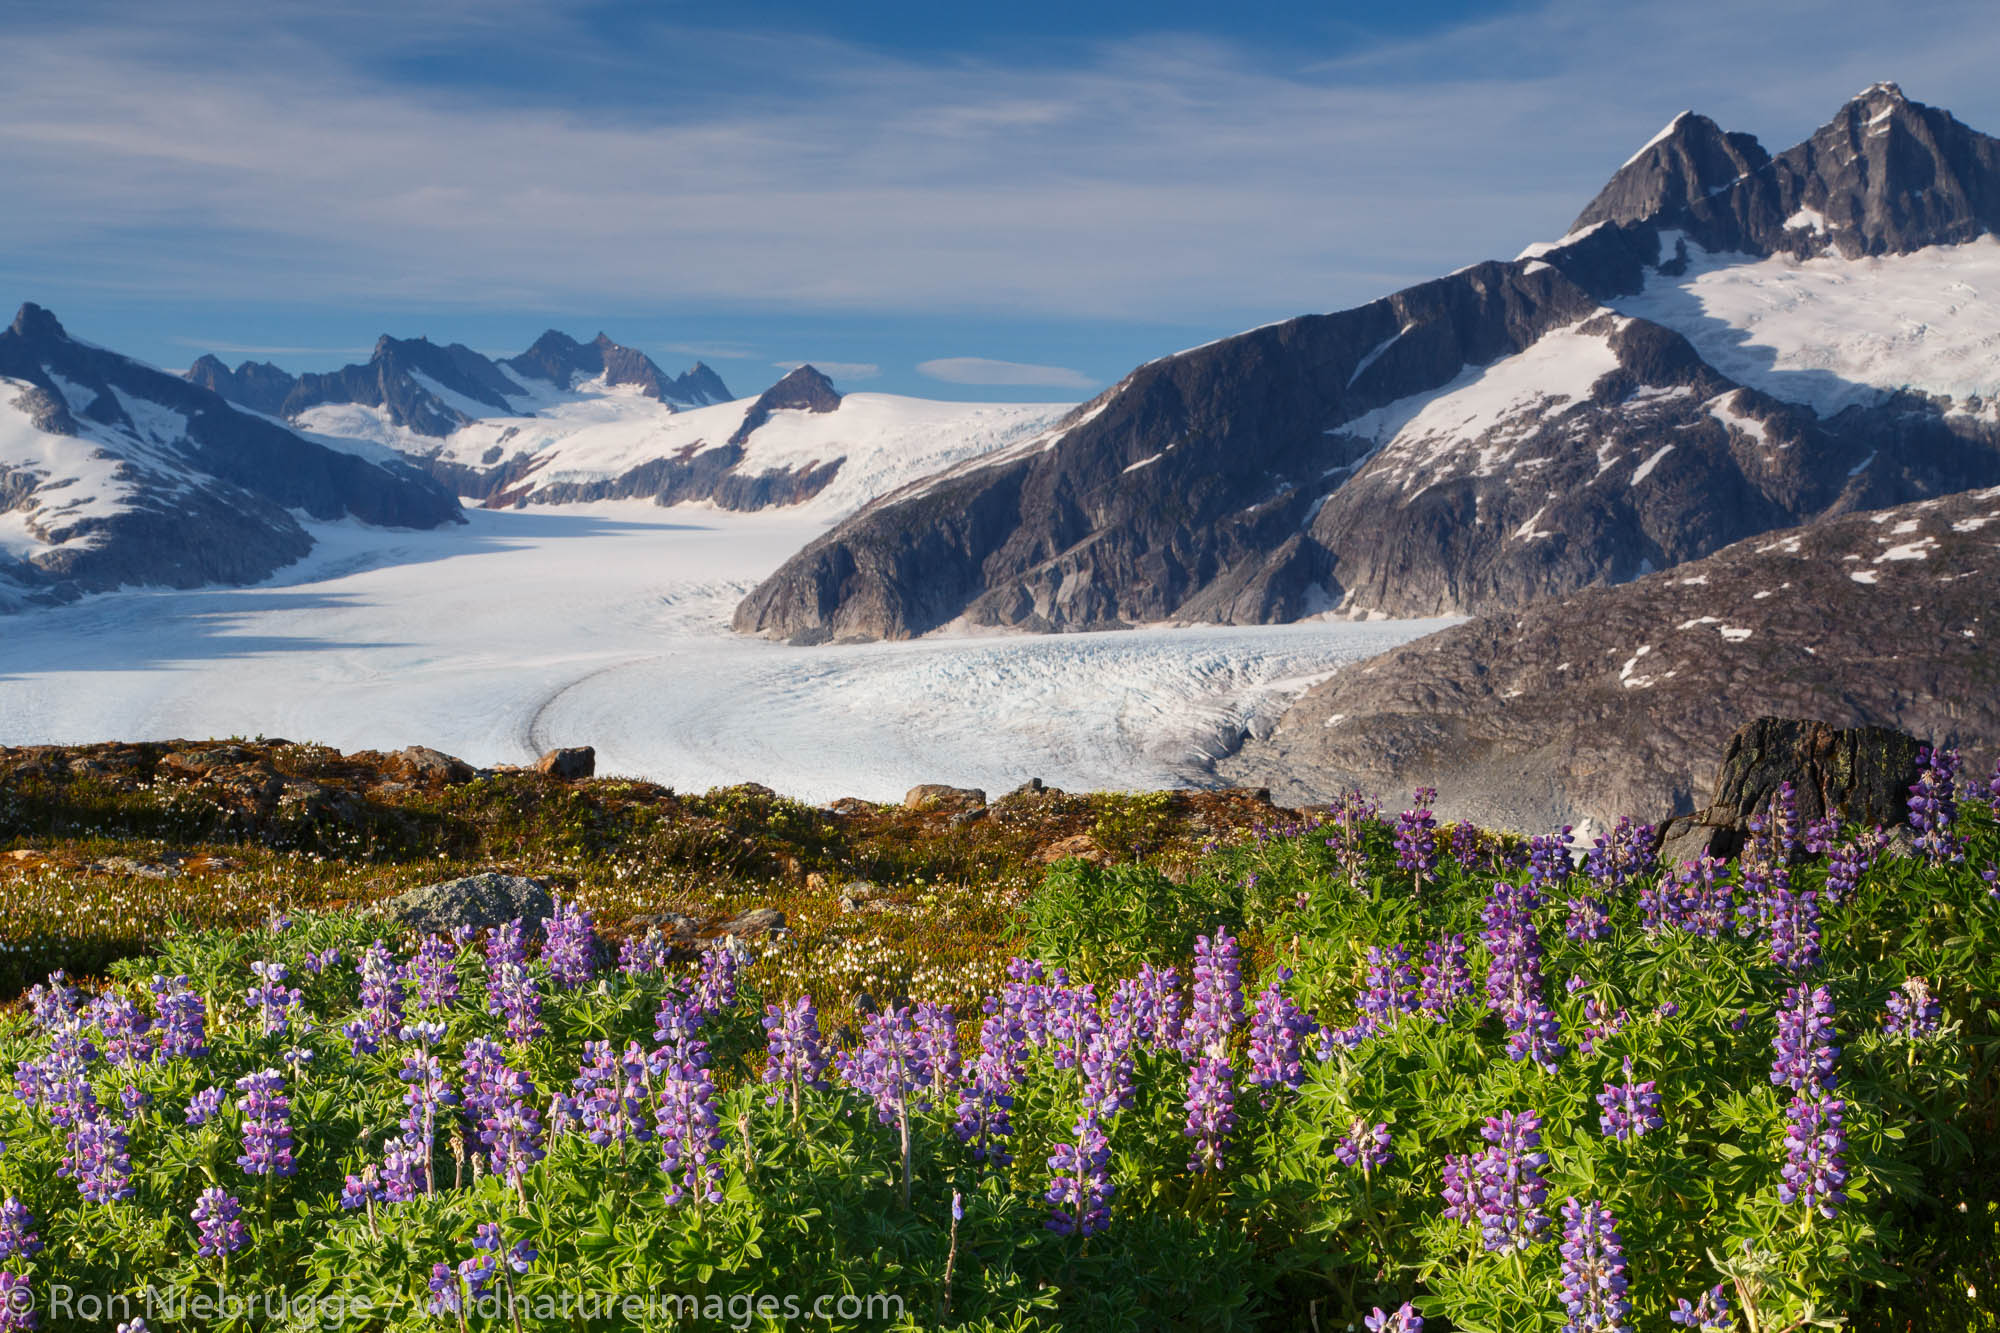 From Mount Stroller White above the Mendenhall Glacier, Tongass National Forest, Alaska.